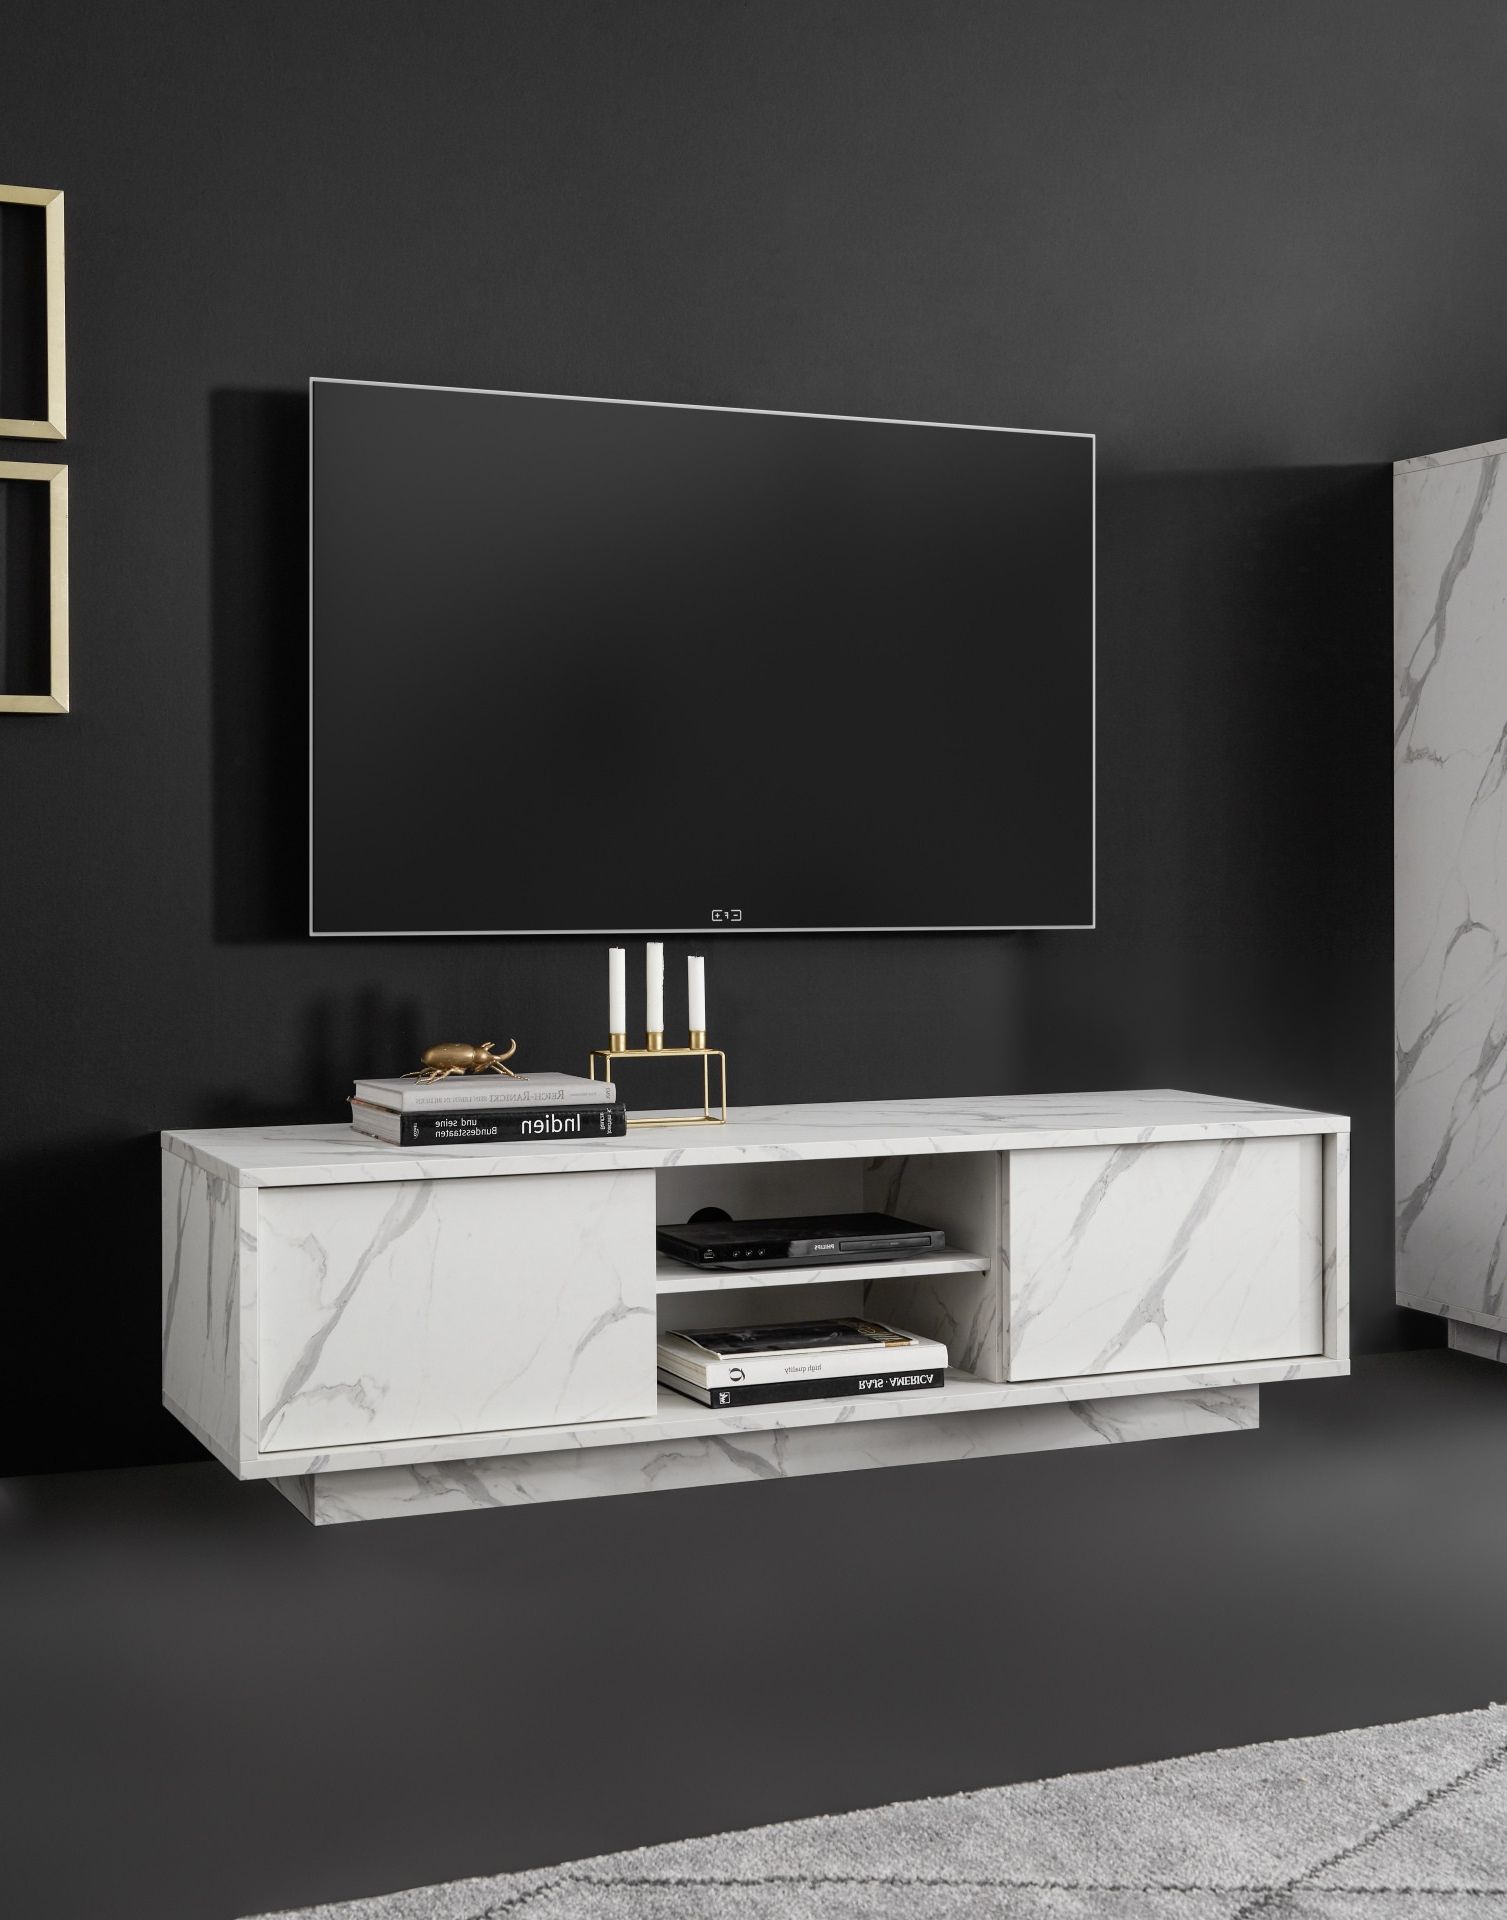 Carrara 139cm Modern Tv Unit In White Marble Imitation Throughout Tv Stands With 2 Open Shelves 2 Drawers High Gloss Tv Unis (View 2 of 20)